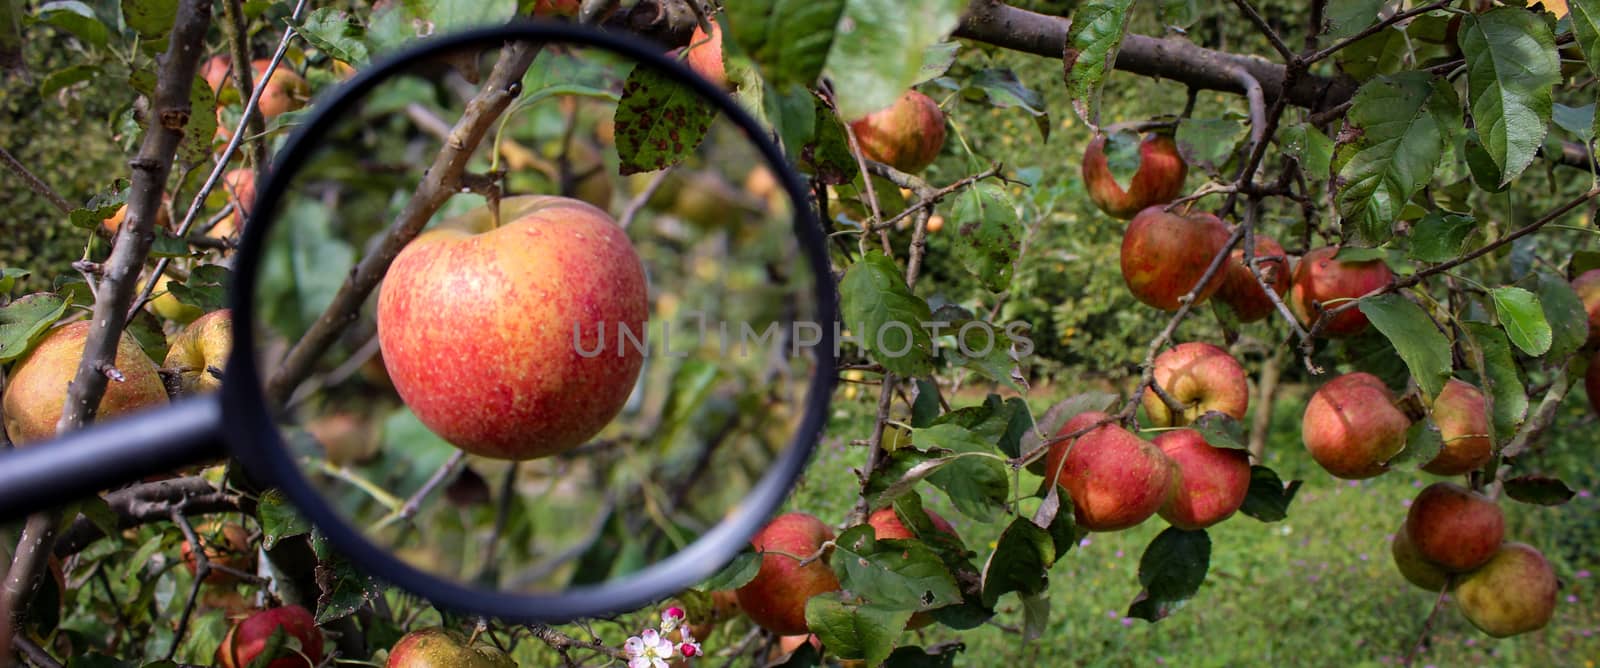 Banner of apples on a branch with an enlarged magnifying glass. In the background they have ripe apples on a branch. Zavidovici, Bosnia and Herzegovina.